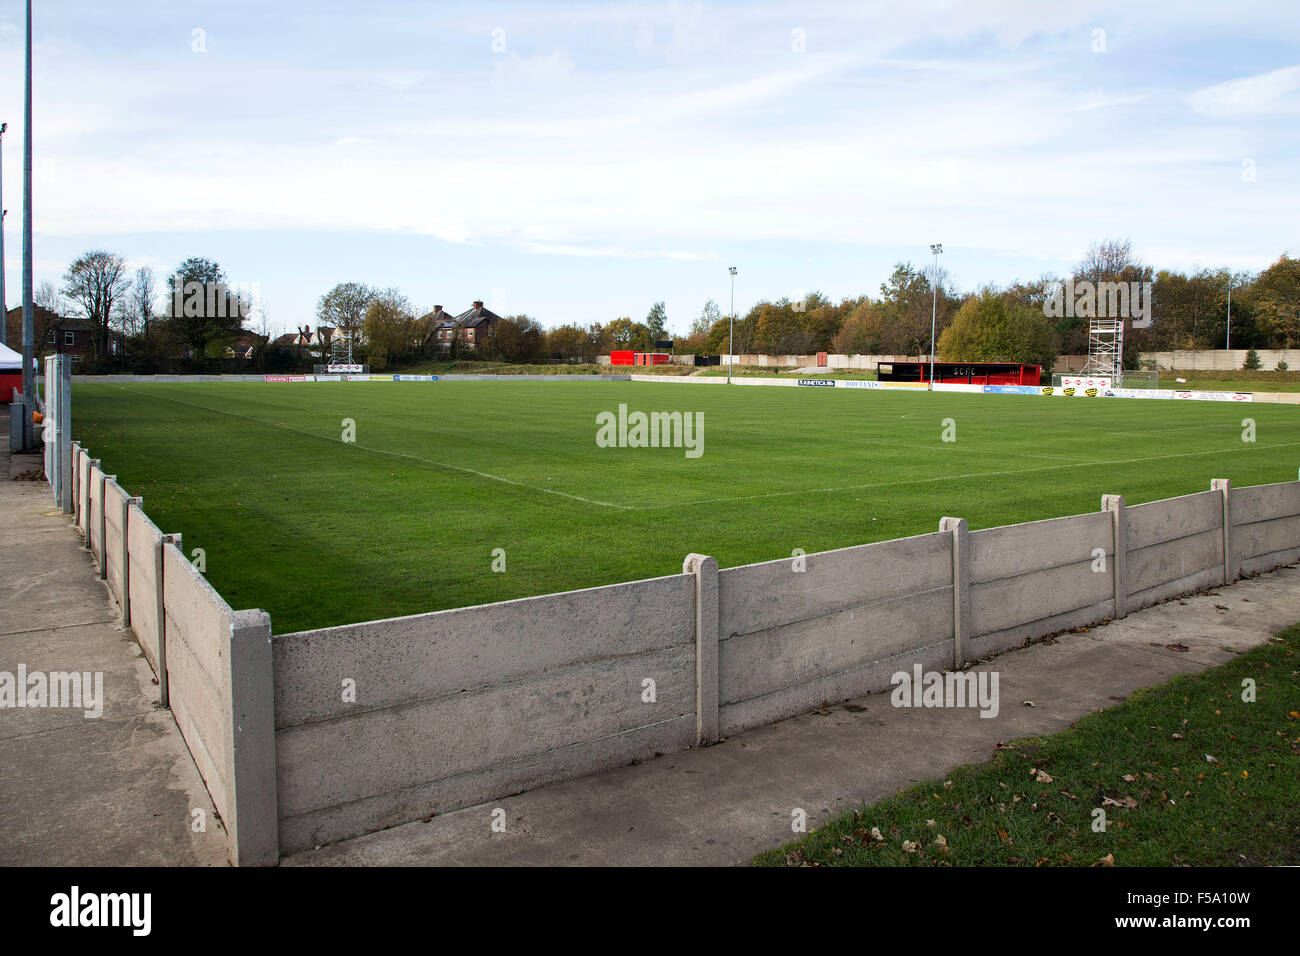 Salford City Football club in Manchester members of the Northern Premier League Premier Division in England Stock Photo